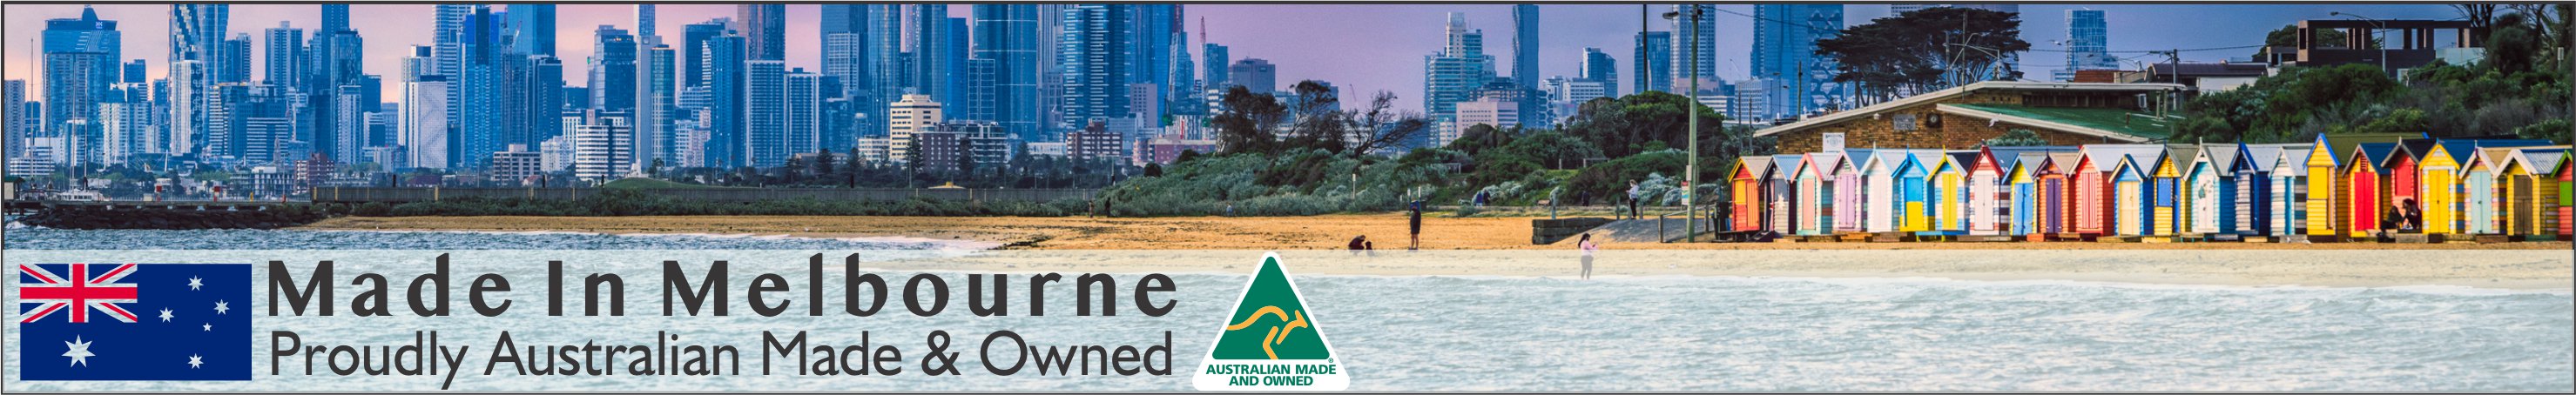 Australian Made Banner for Australian Ugg Boots. Brighton Beach Houses and Melbourne Skyline. Australian Made and Owned logo.